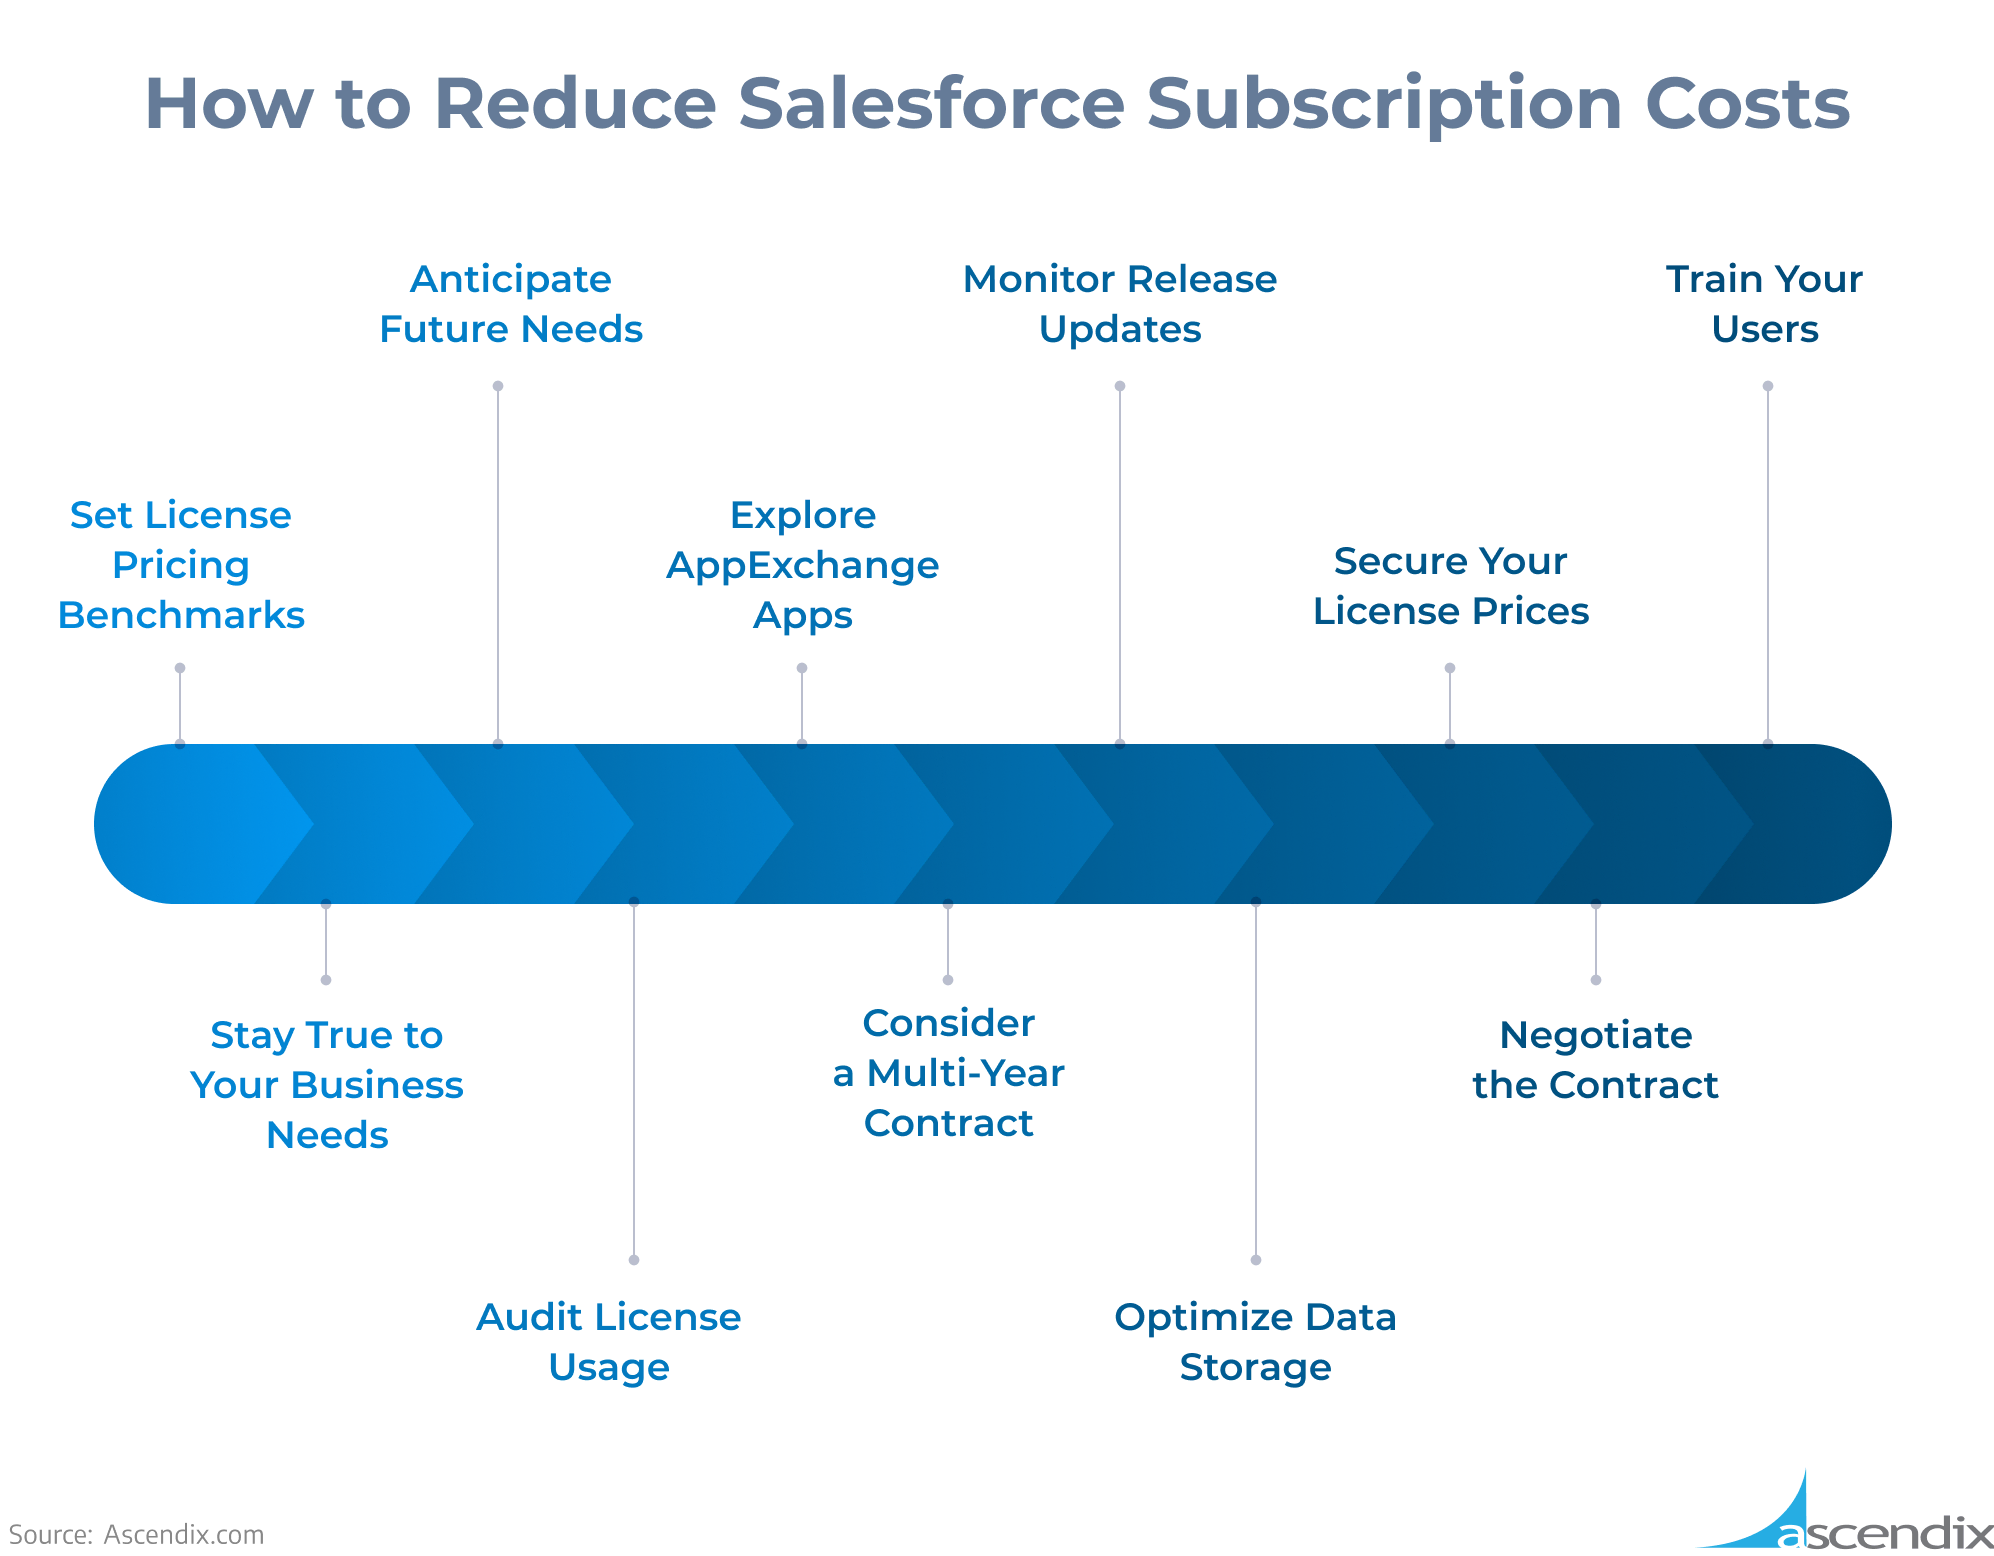 How to Reduce Salesforce Subscription Costs | Ascendix